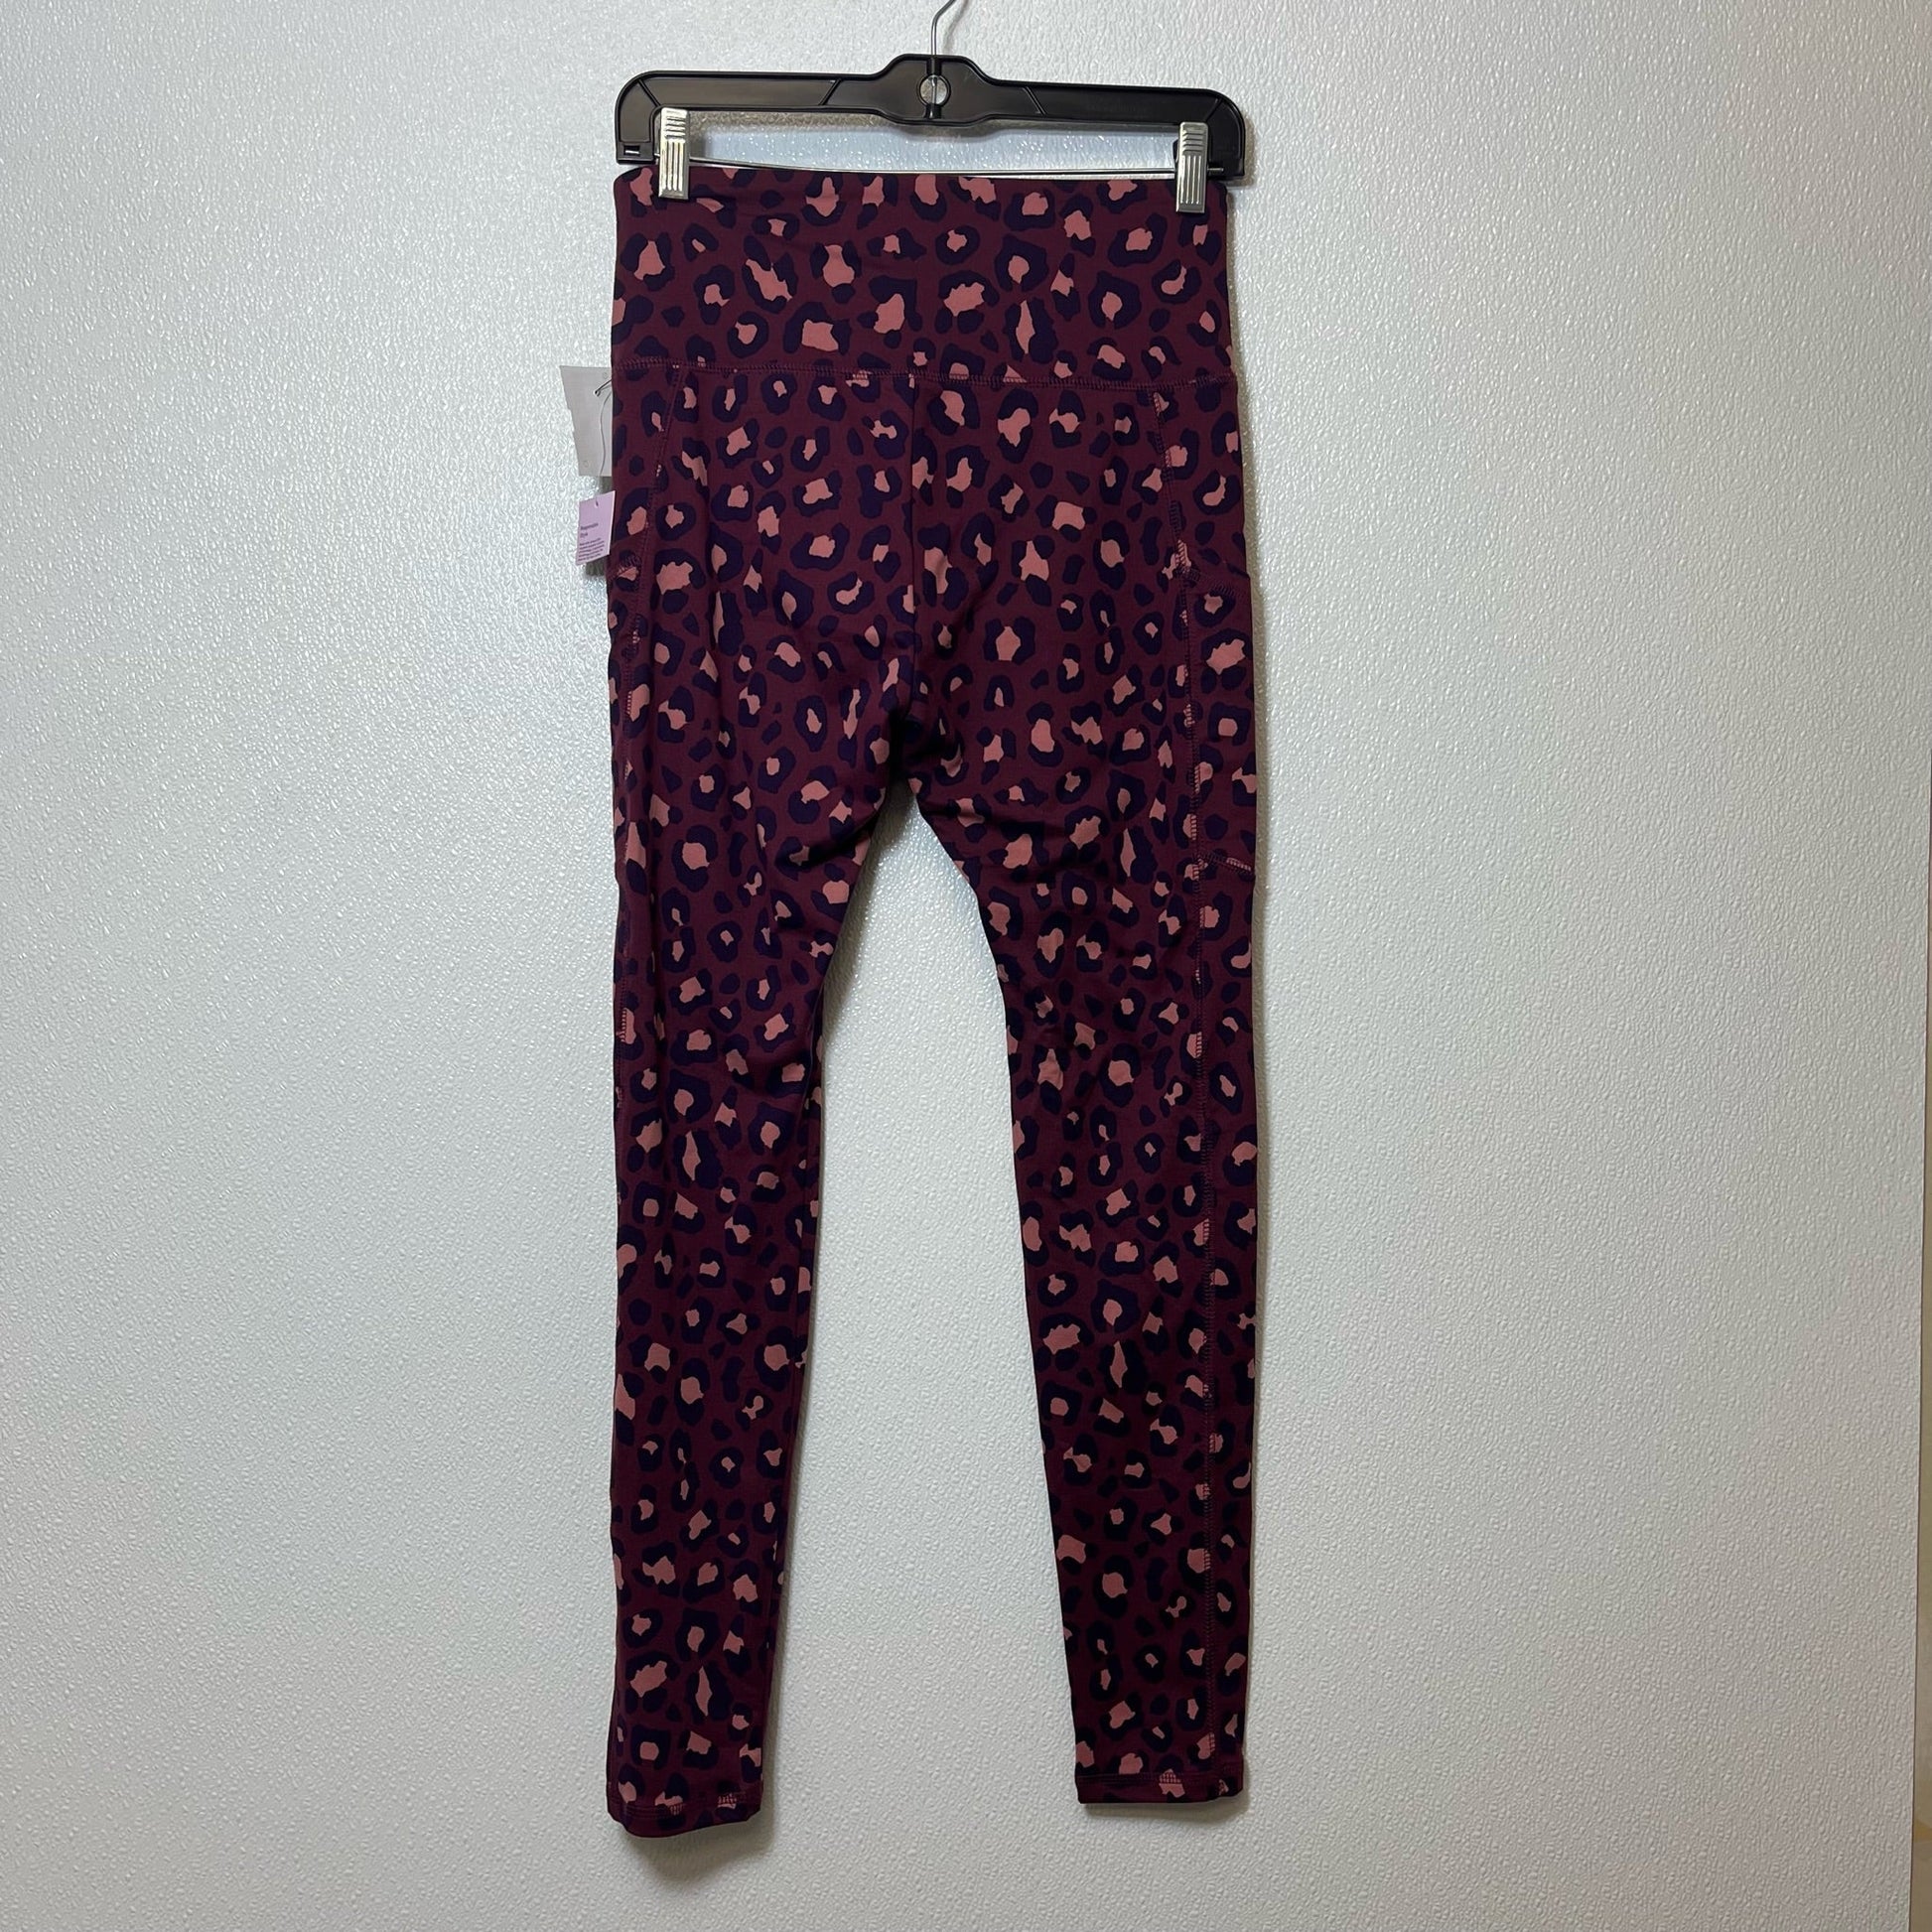 Leggings By Wild Fable Size: M